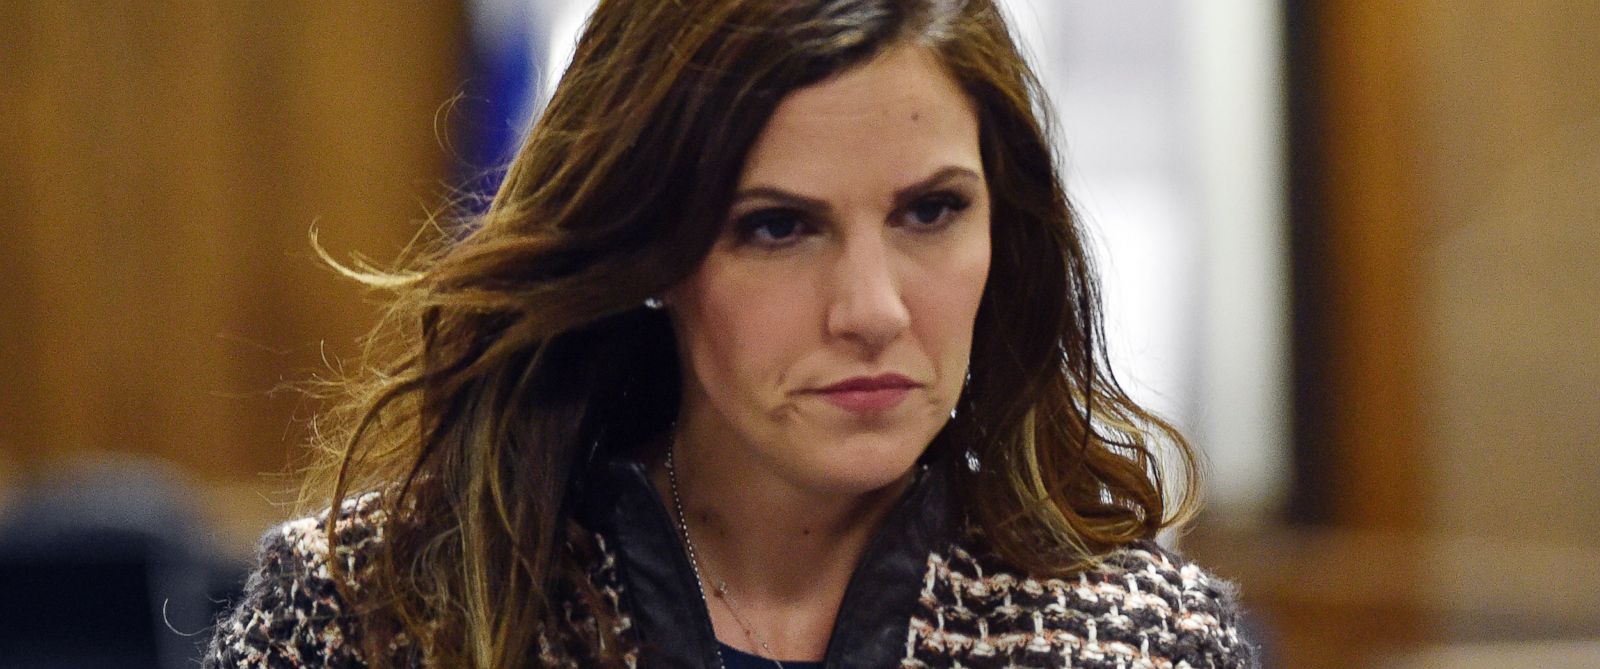 American Sniper Trial Widow Taya Kyle Praises Jurys Decision To Convict Eddie Ray Routh